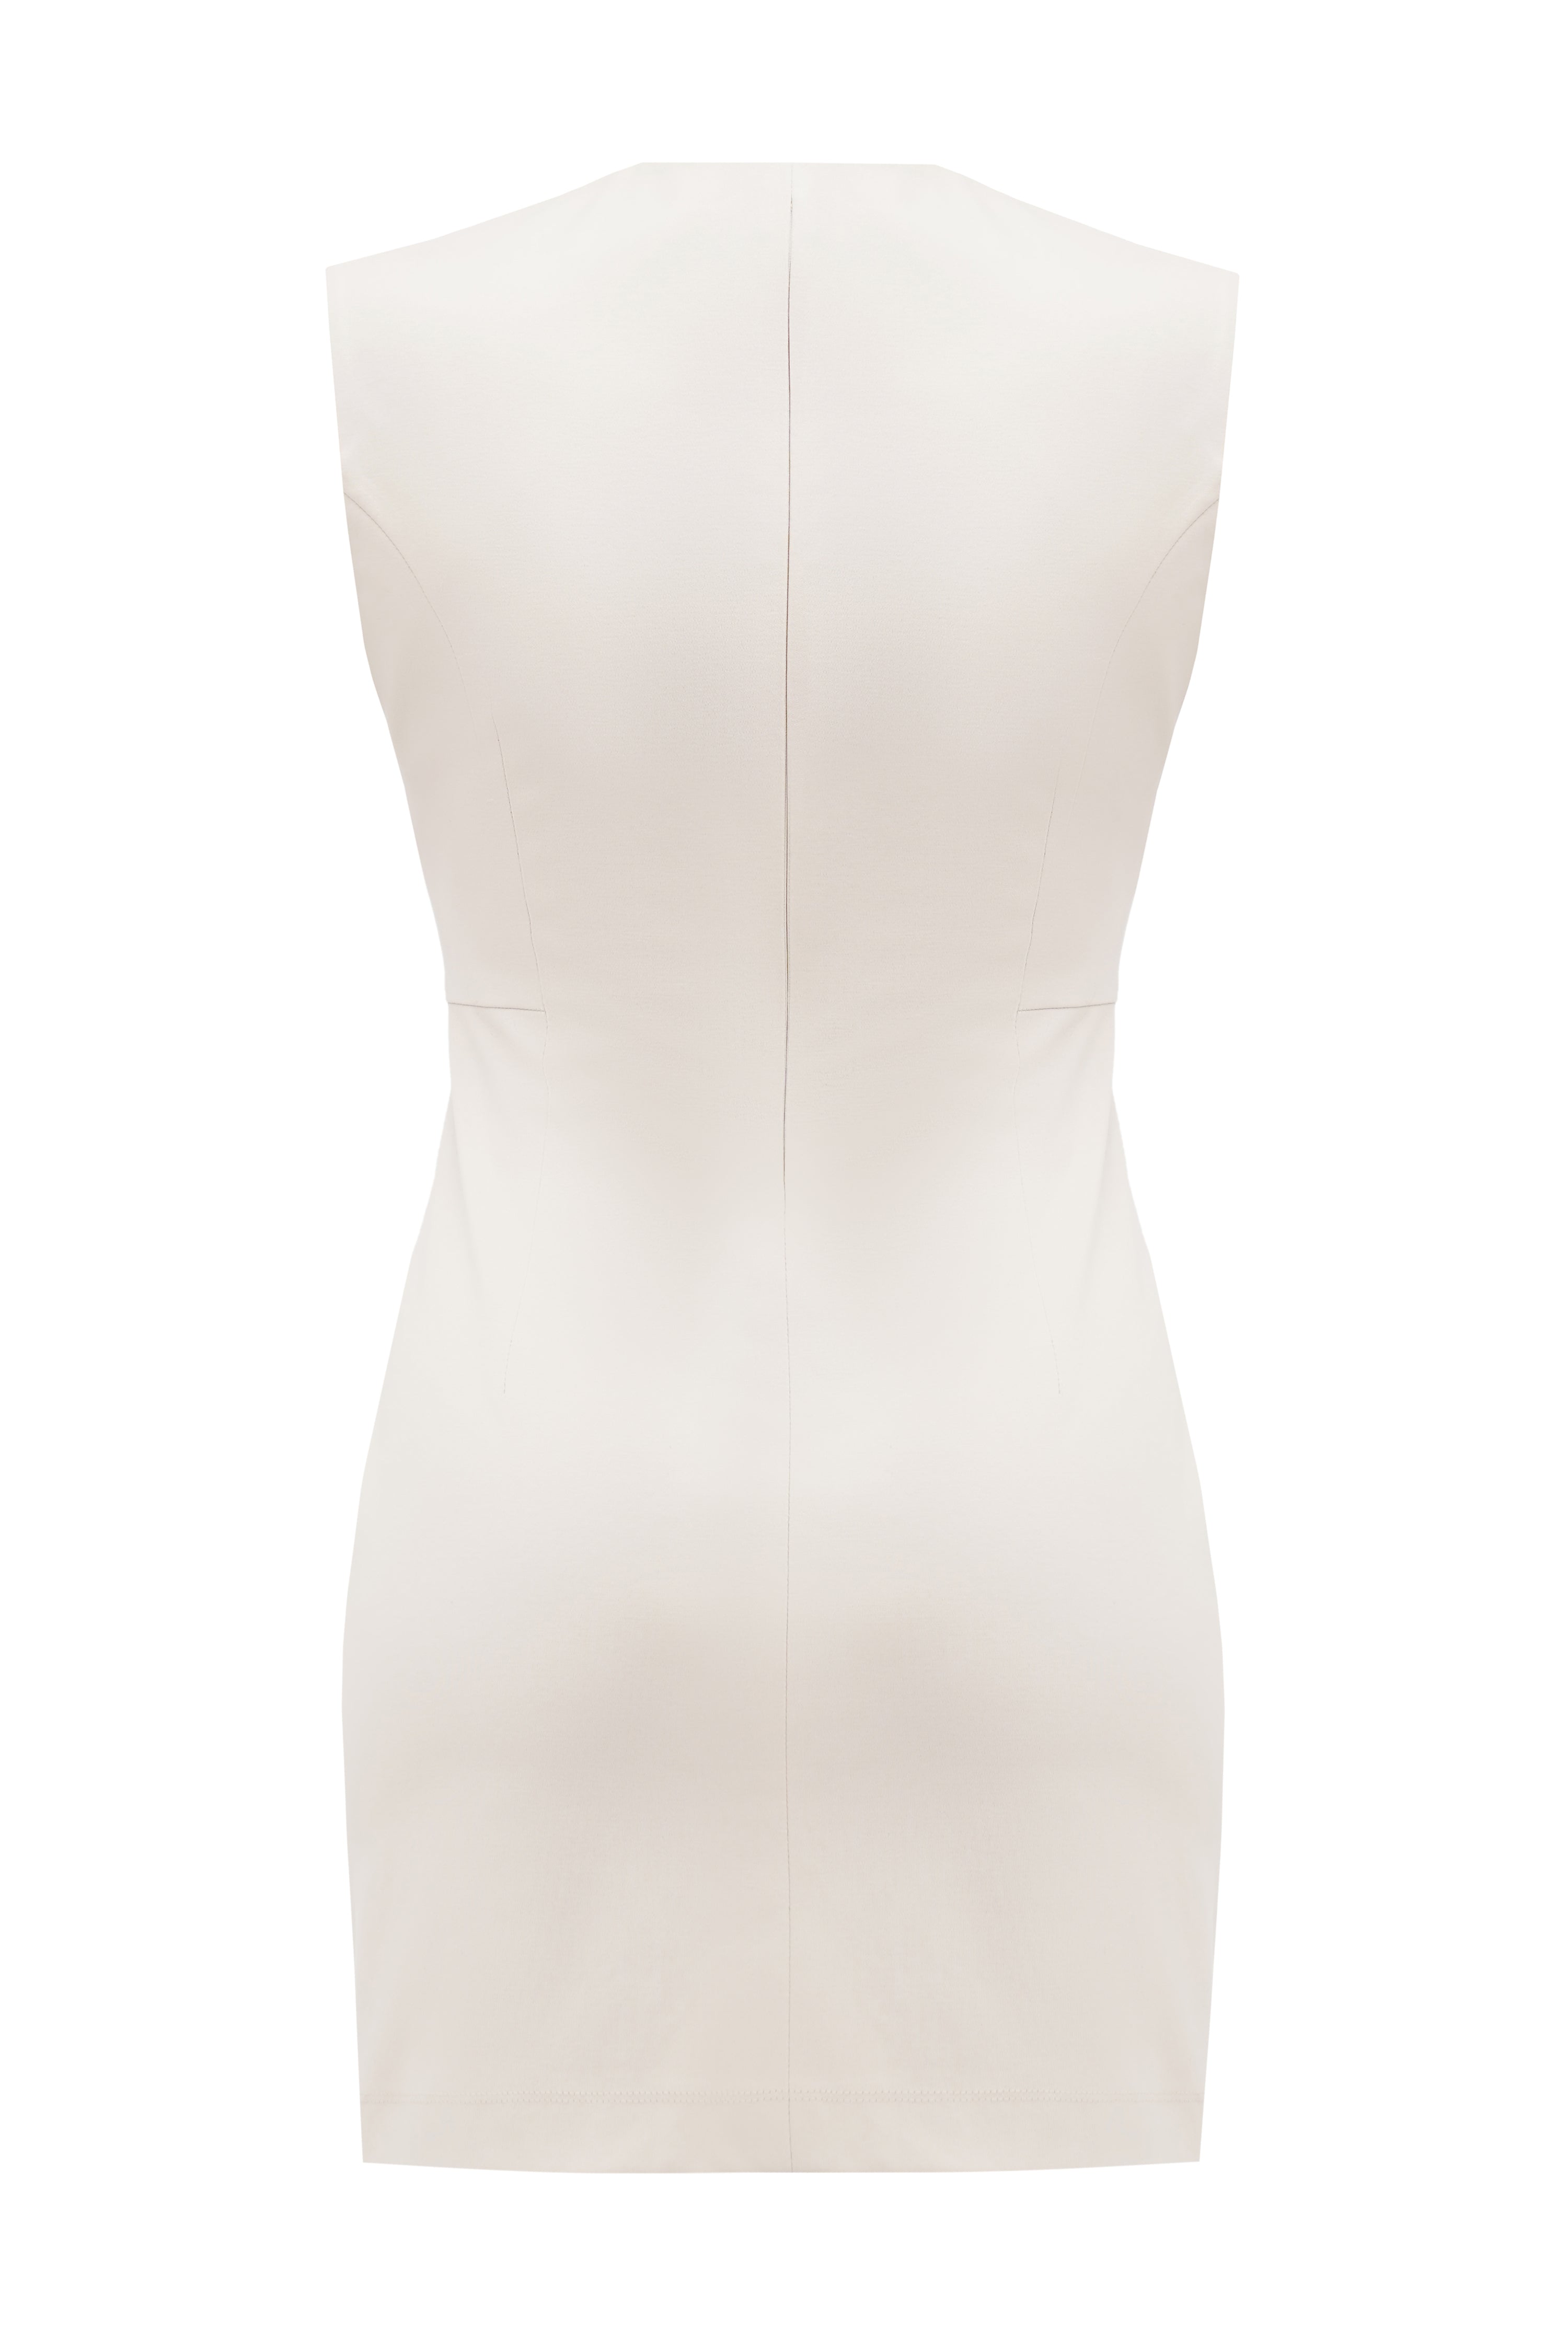 Back of an organic cotton mini dress with a invisible zipper in a middle